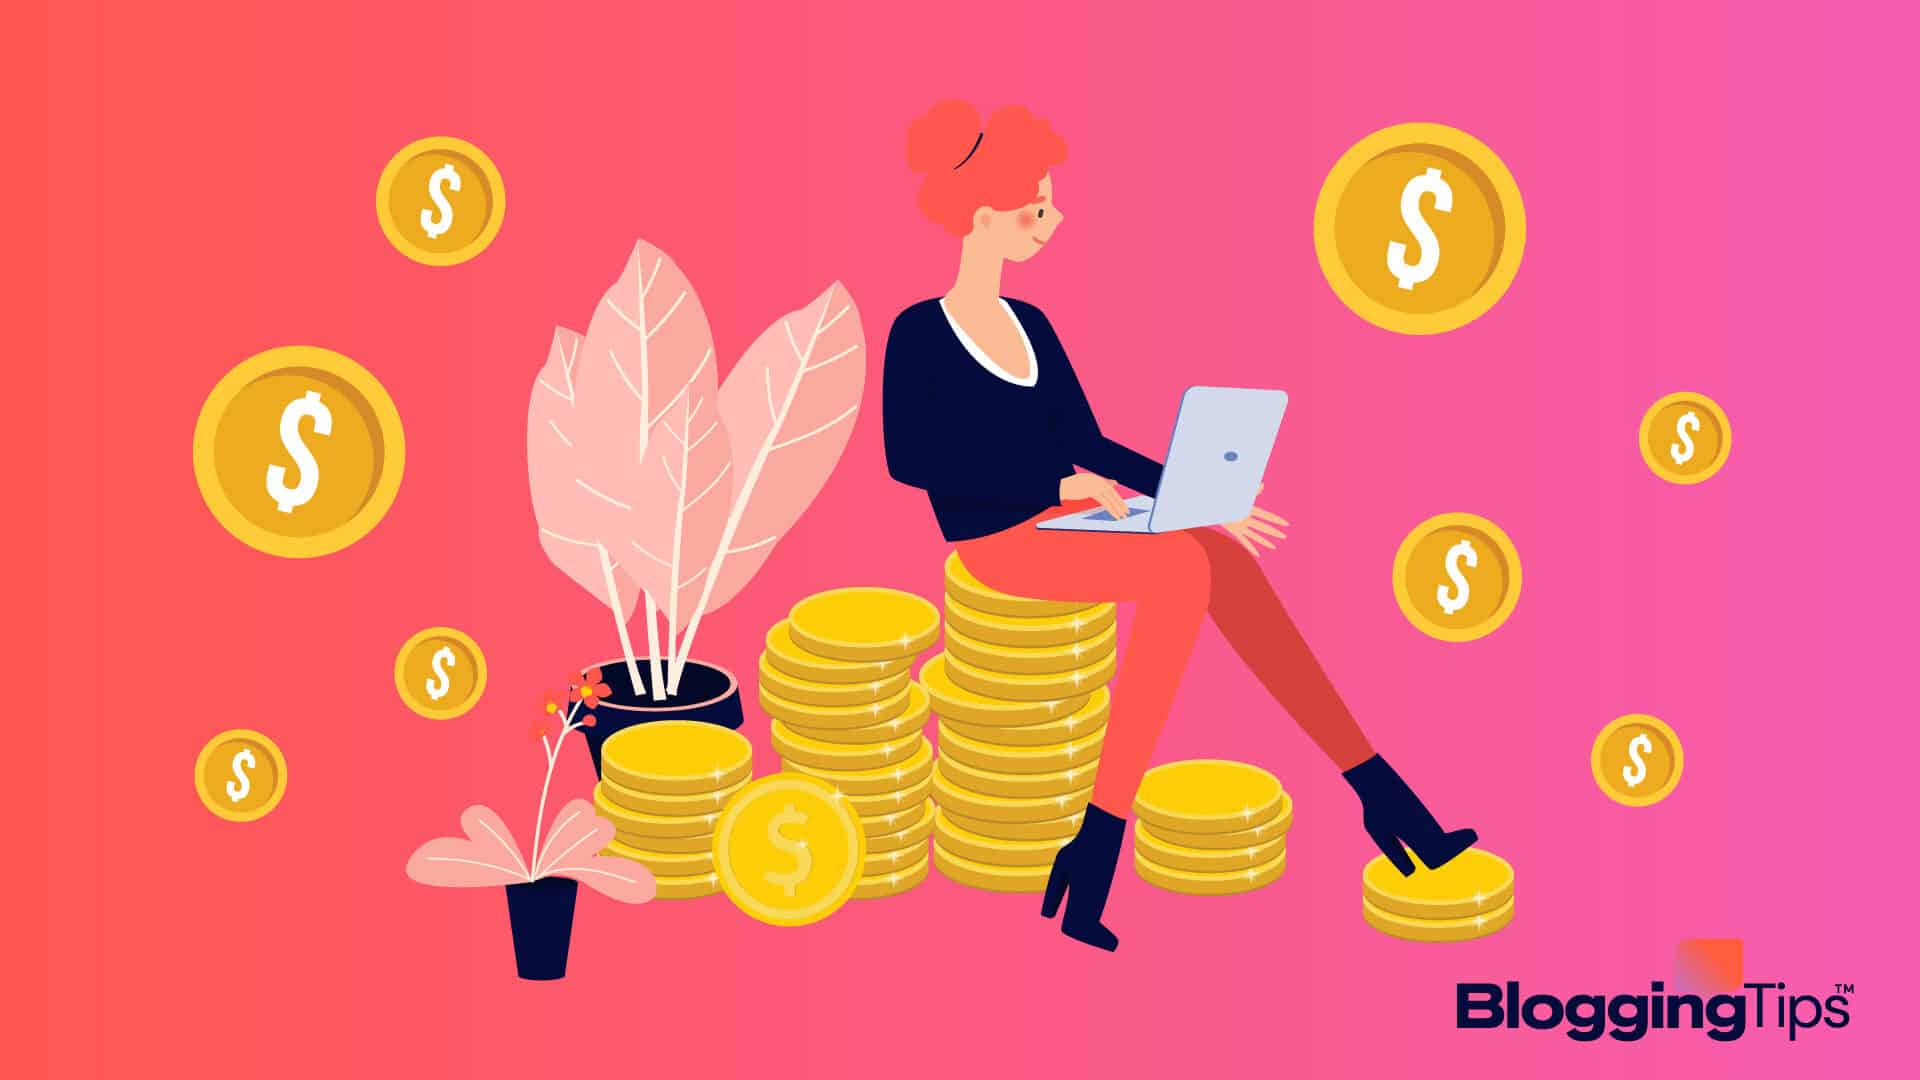 vector graphic showing an illustration of a woman working to succeed with affiliate marketing